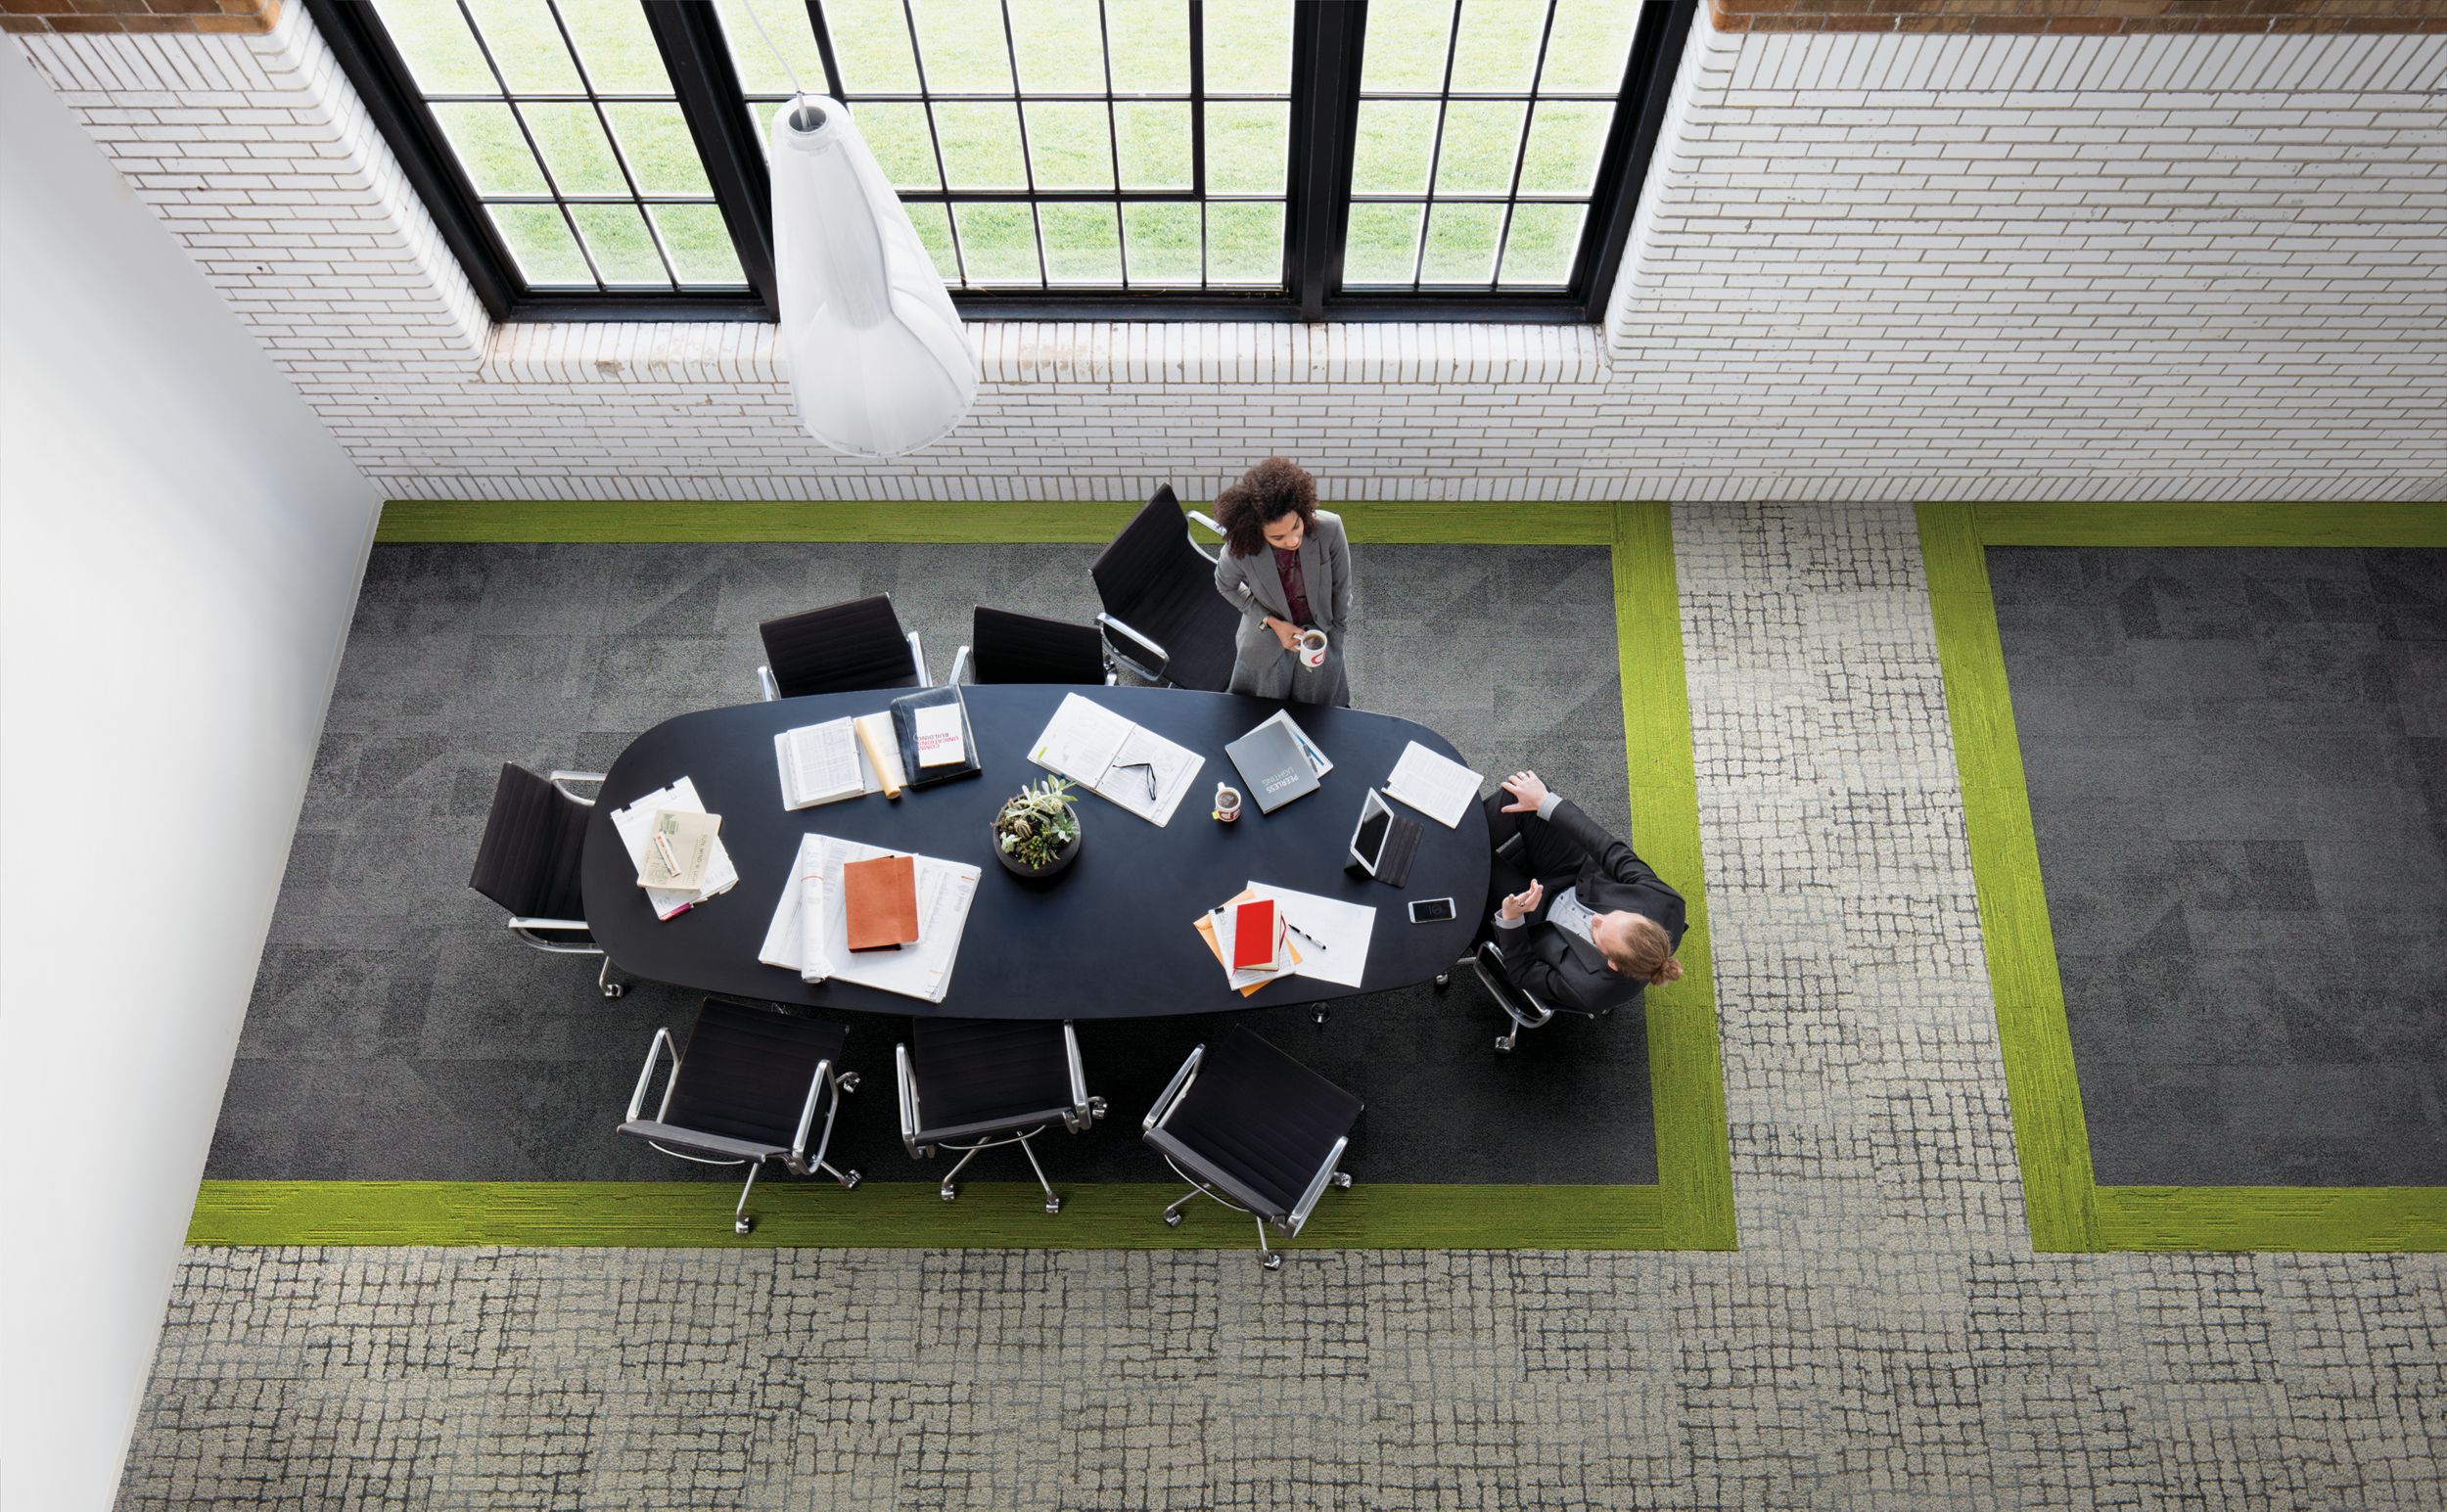 image Interface Paver and Sett in Stone carpet tile with UR501 plank carpet tile in overhead view of meeting area with man and women conversating numéro 6